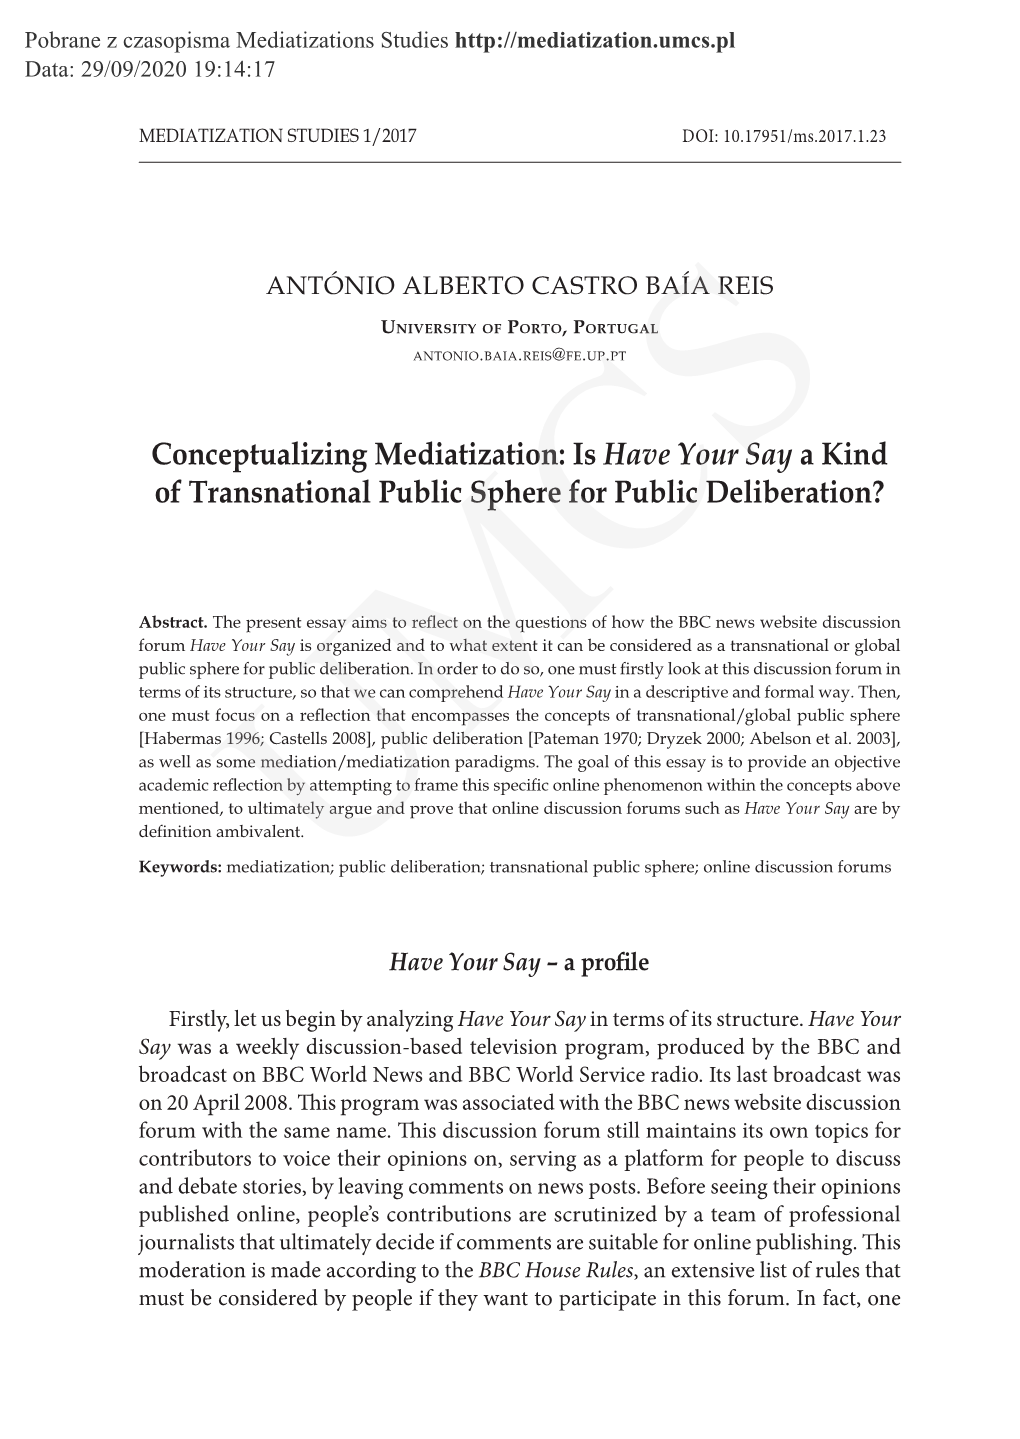 Conceptualizing Mediatization: Is Have Your Say a Kind of Transnational Public Sphere for Public Deliberation?